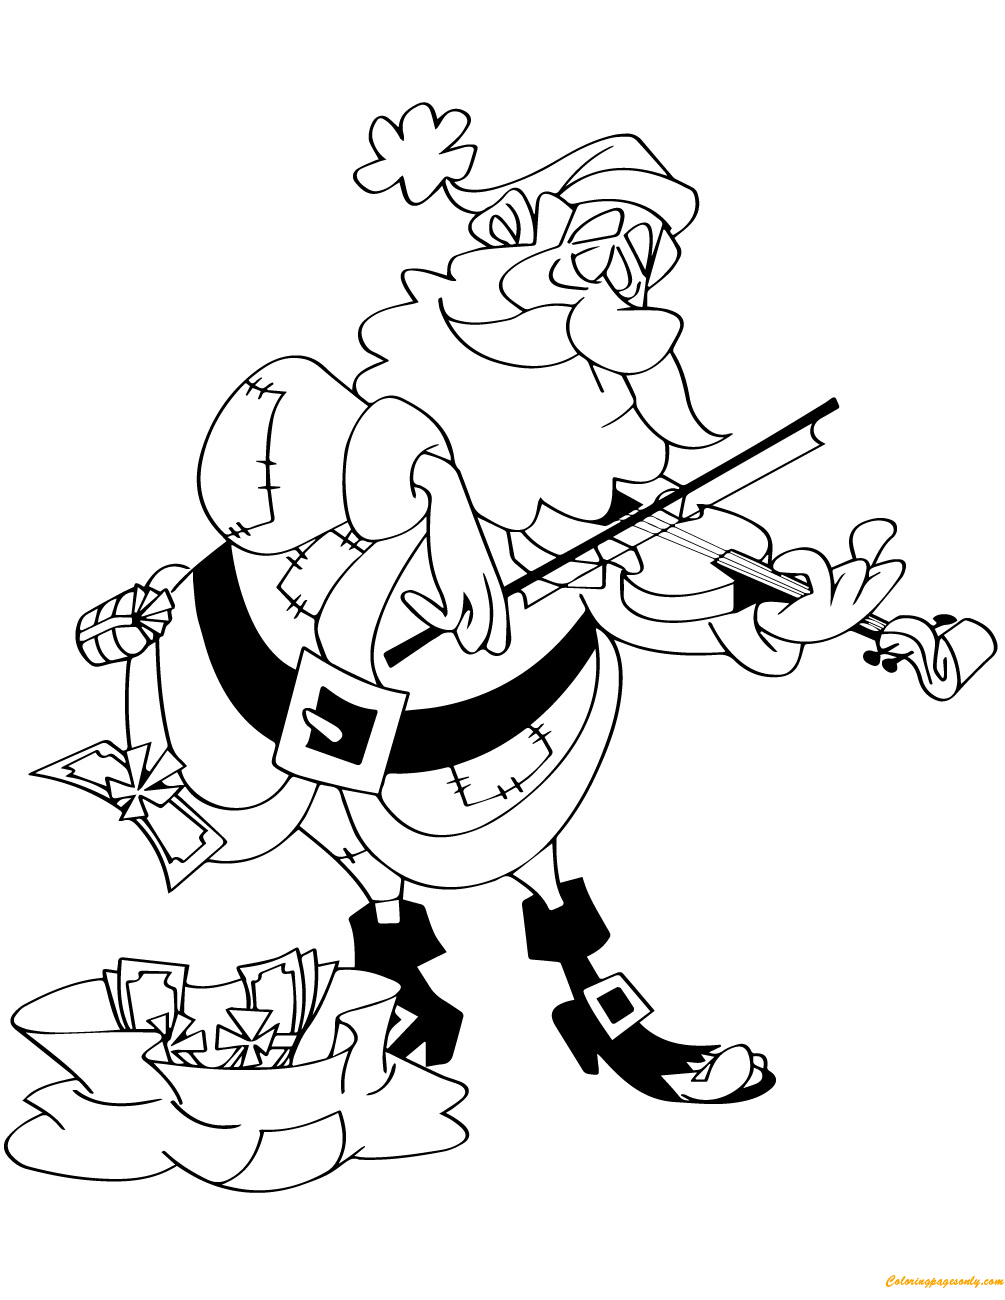 Download Santa Claus Playing Violin Coloring Pages - Holidays Coloring Pages - Free Printable Coloring ...